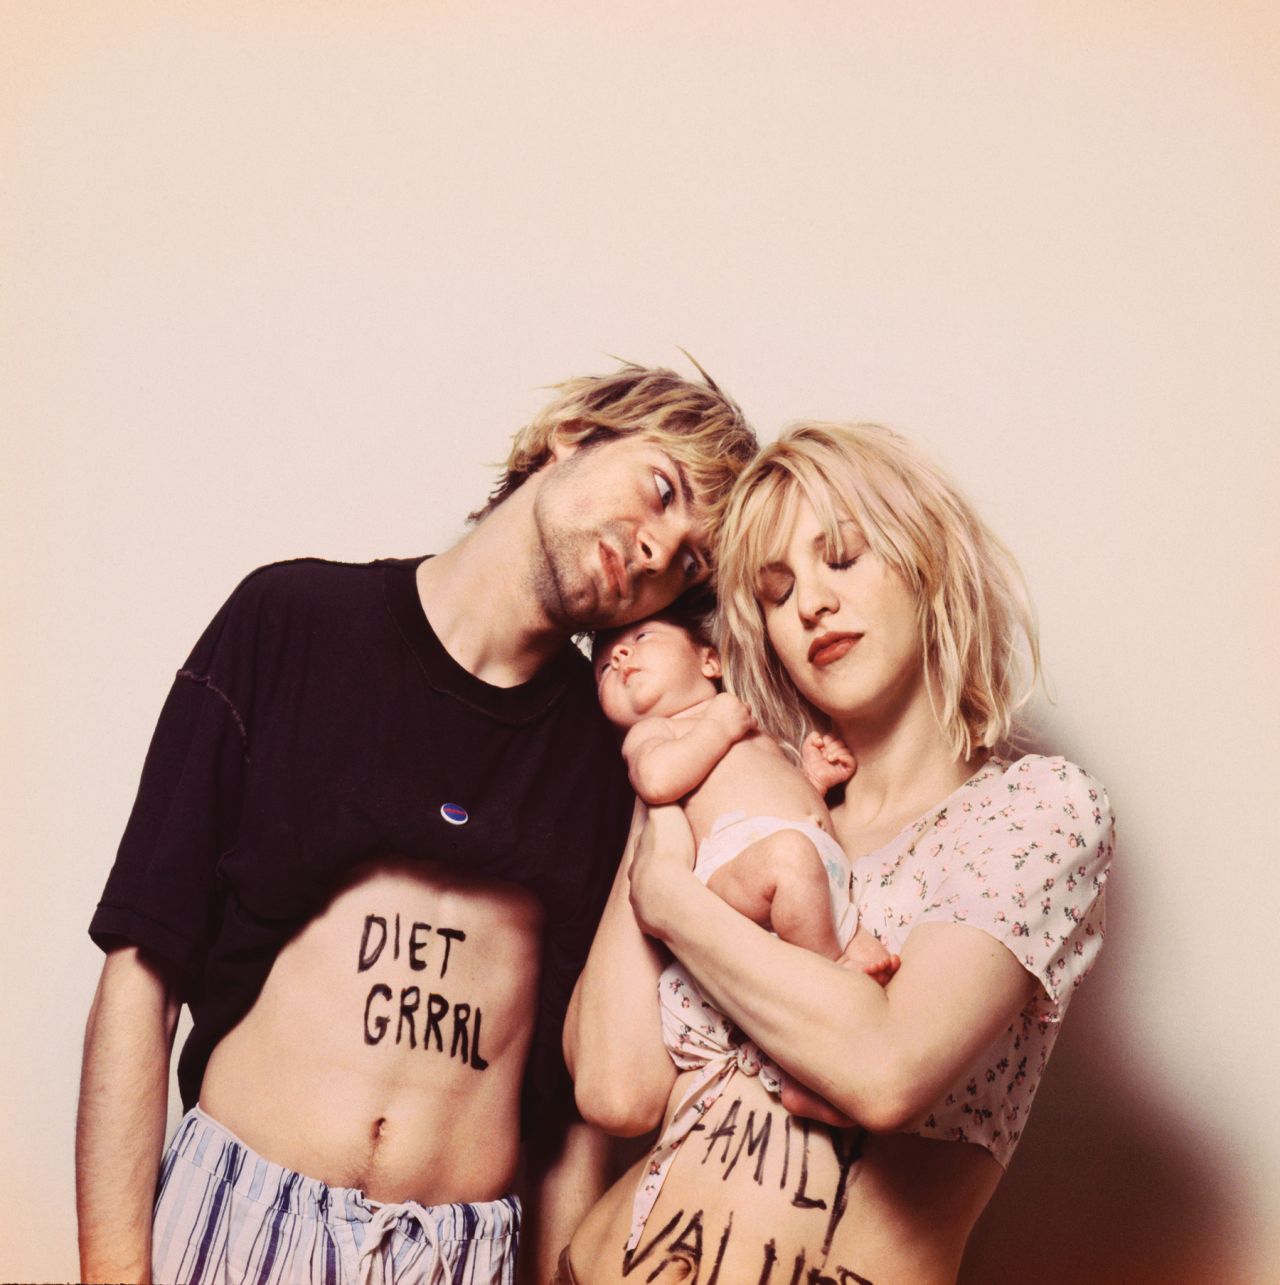 Unseen photos of Kurt Cobain and family to be published for first time | Creative Boom